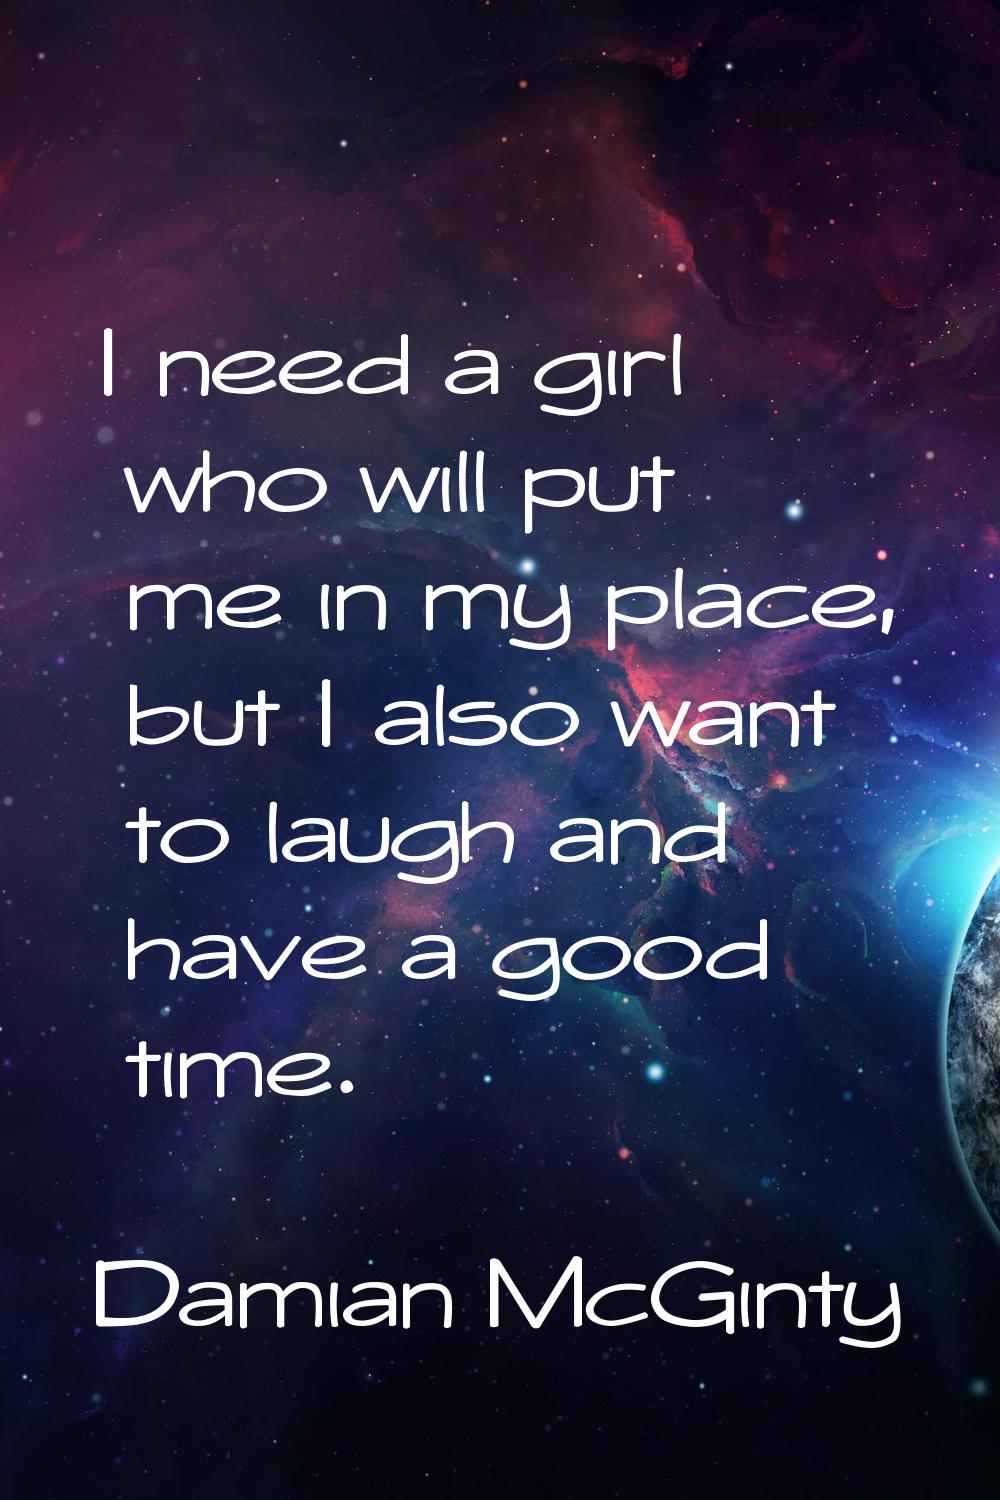 I need a girl who will put me in my place, but I also want to laugh and have a good time.